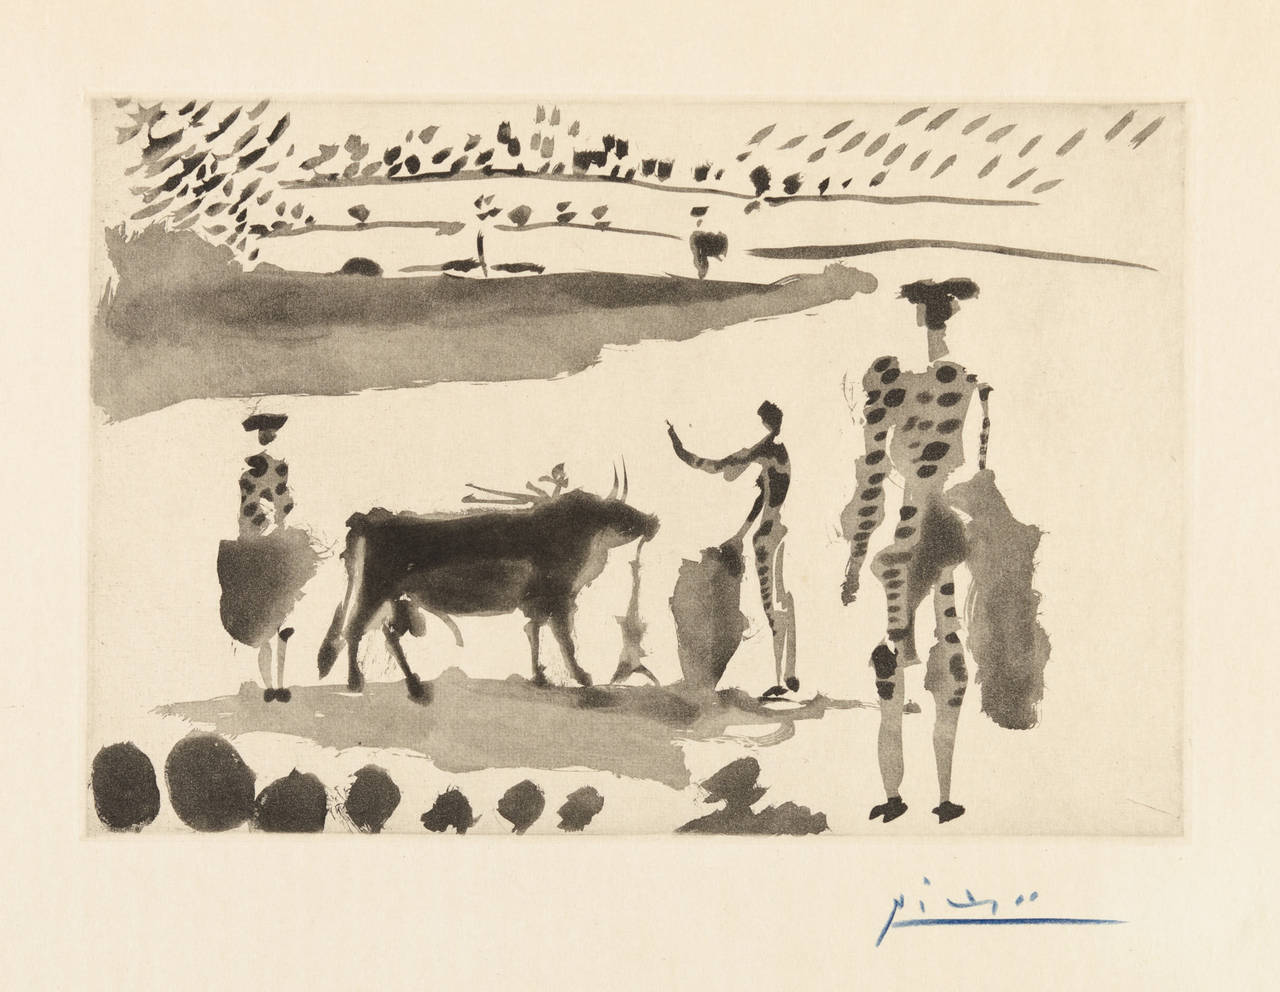 Pablo Picasso Figurative Print - After the Thrust the Bullfighter Indicates the Death of the Bull